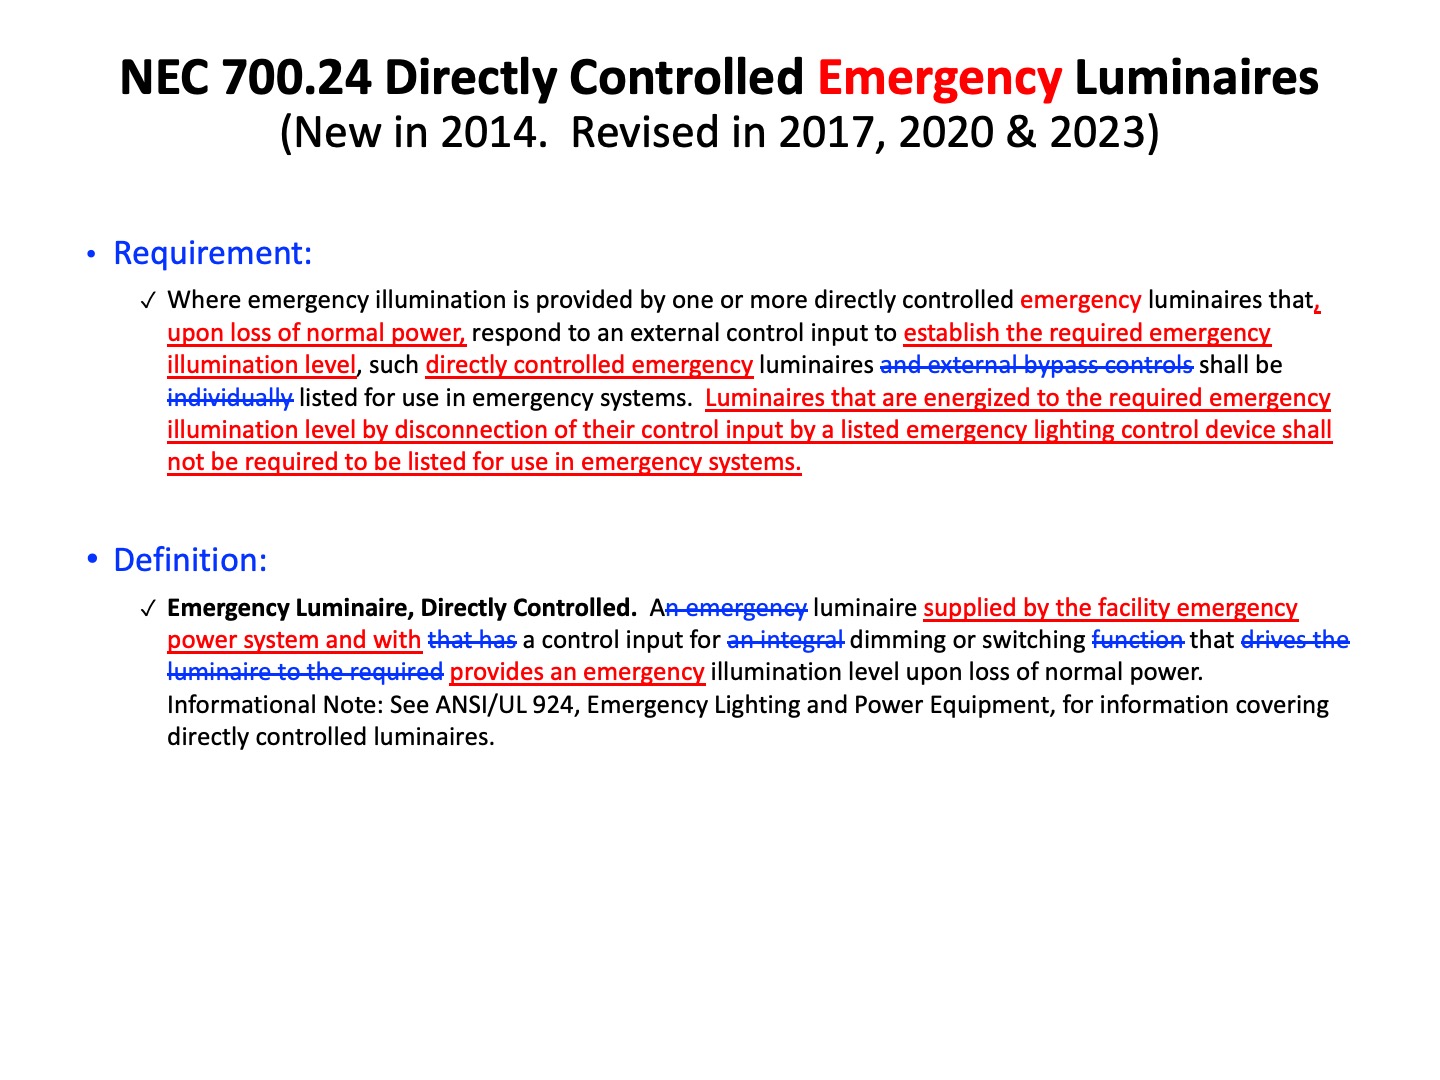 NEC 700.24 Directly Controlled Emergency Luminaires (New in 2014. Revised in 2017, 2020 & 2023)